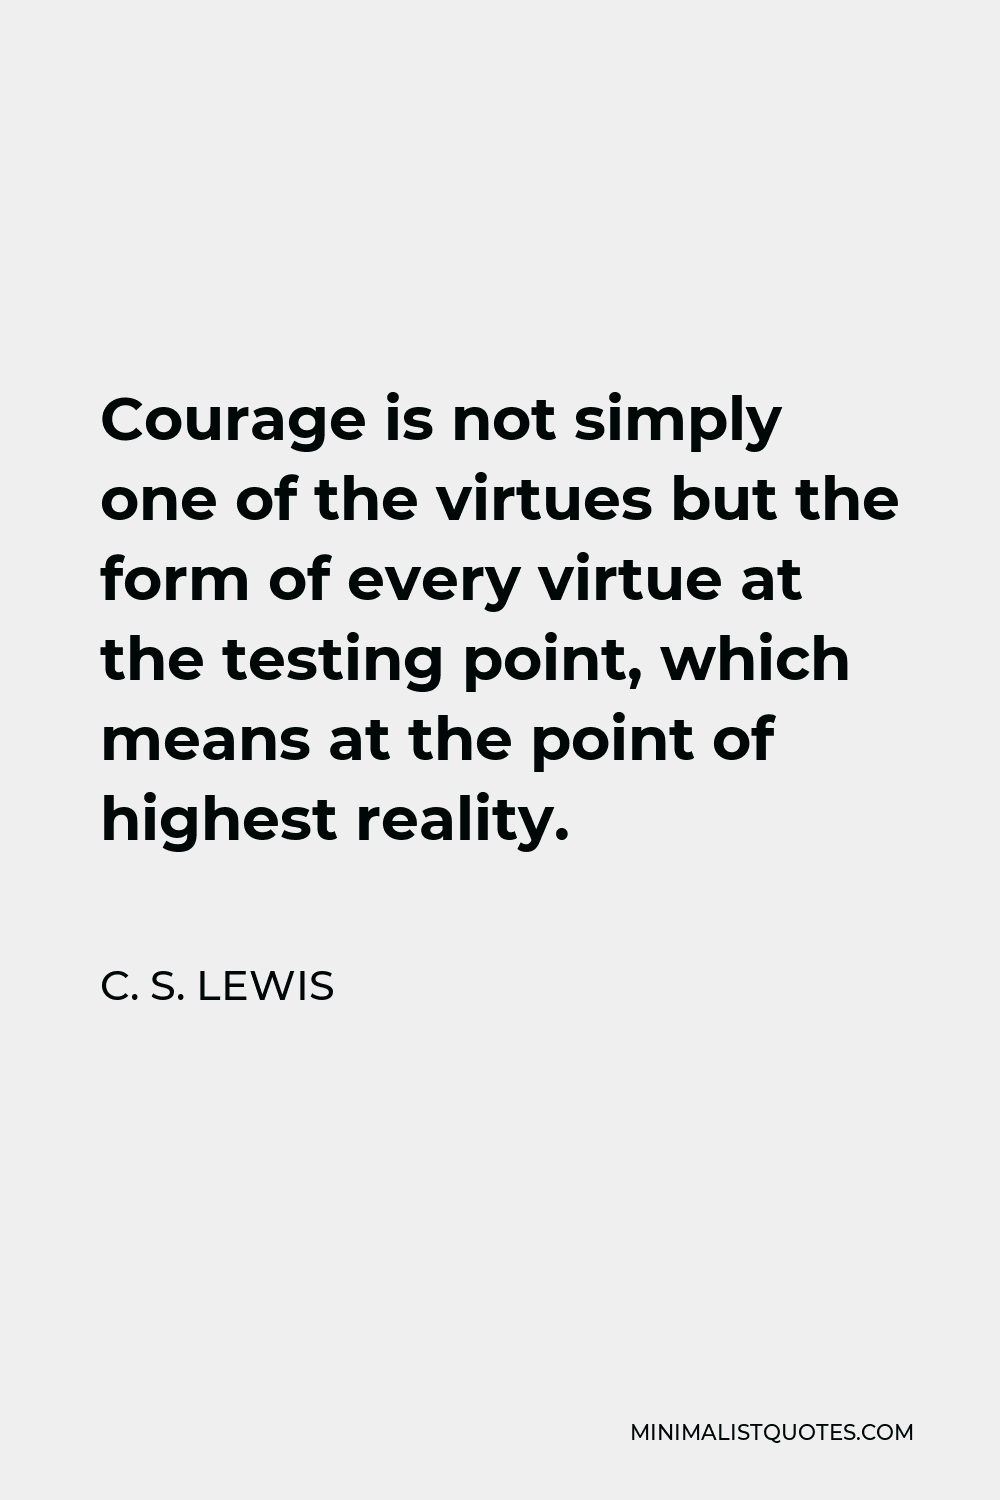 C. S. Lewis Quote - Courage is not simply one of the virtues but the form of every virtue at the testing point, which means at the point of highest reality.